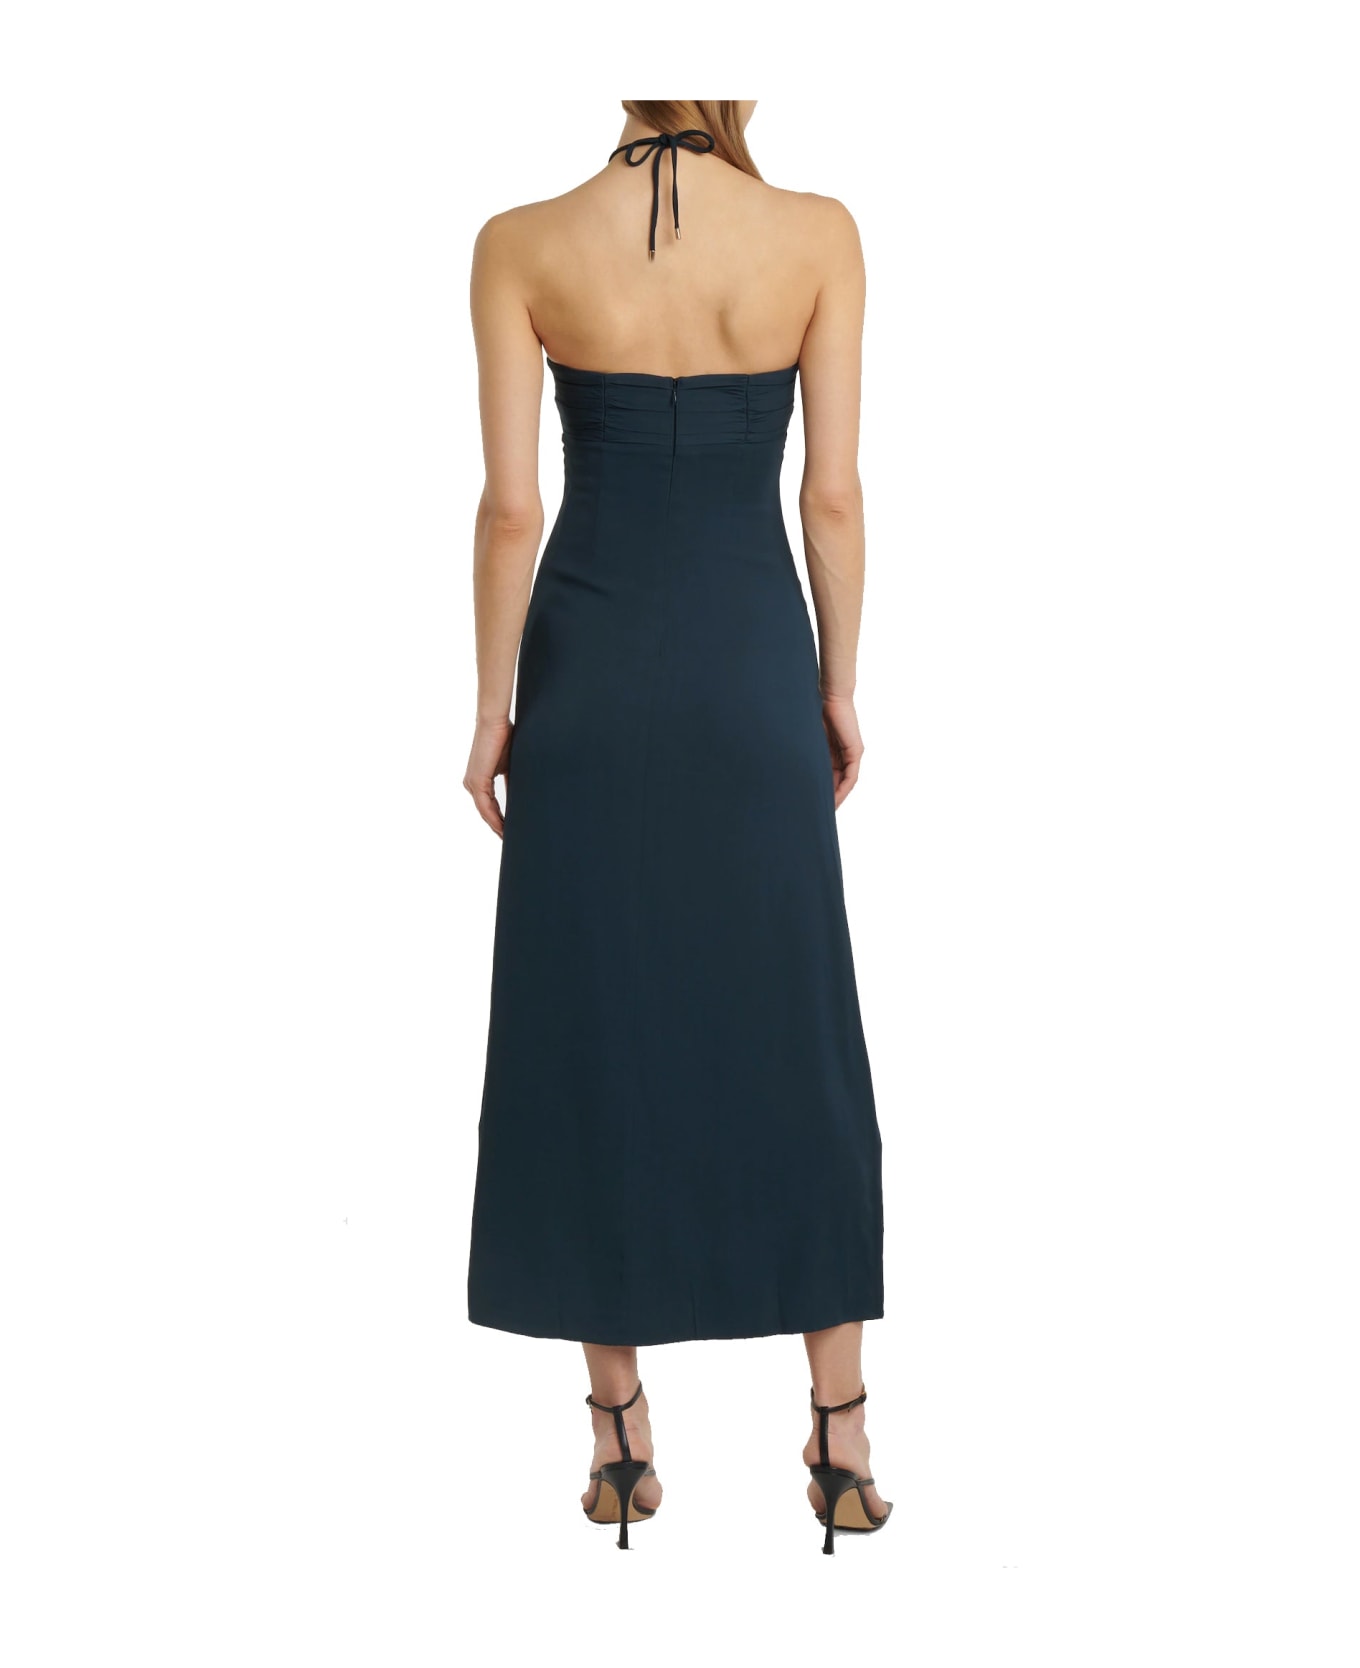 self-portrait Cut-out Ruched Maxi Dress - Gray